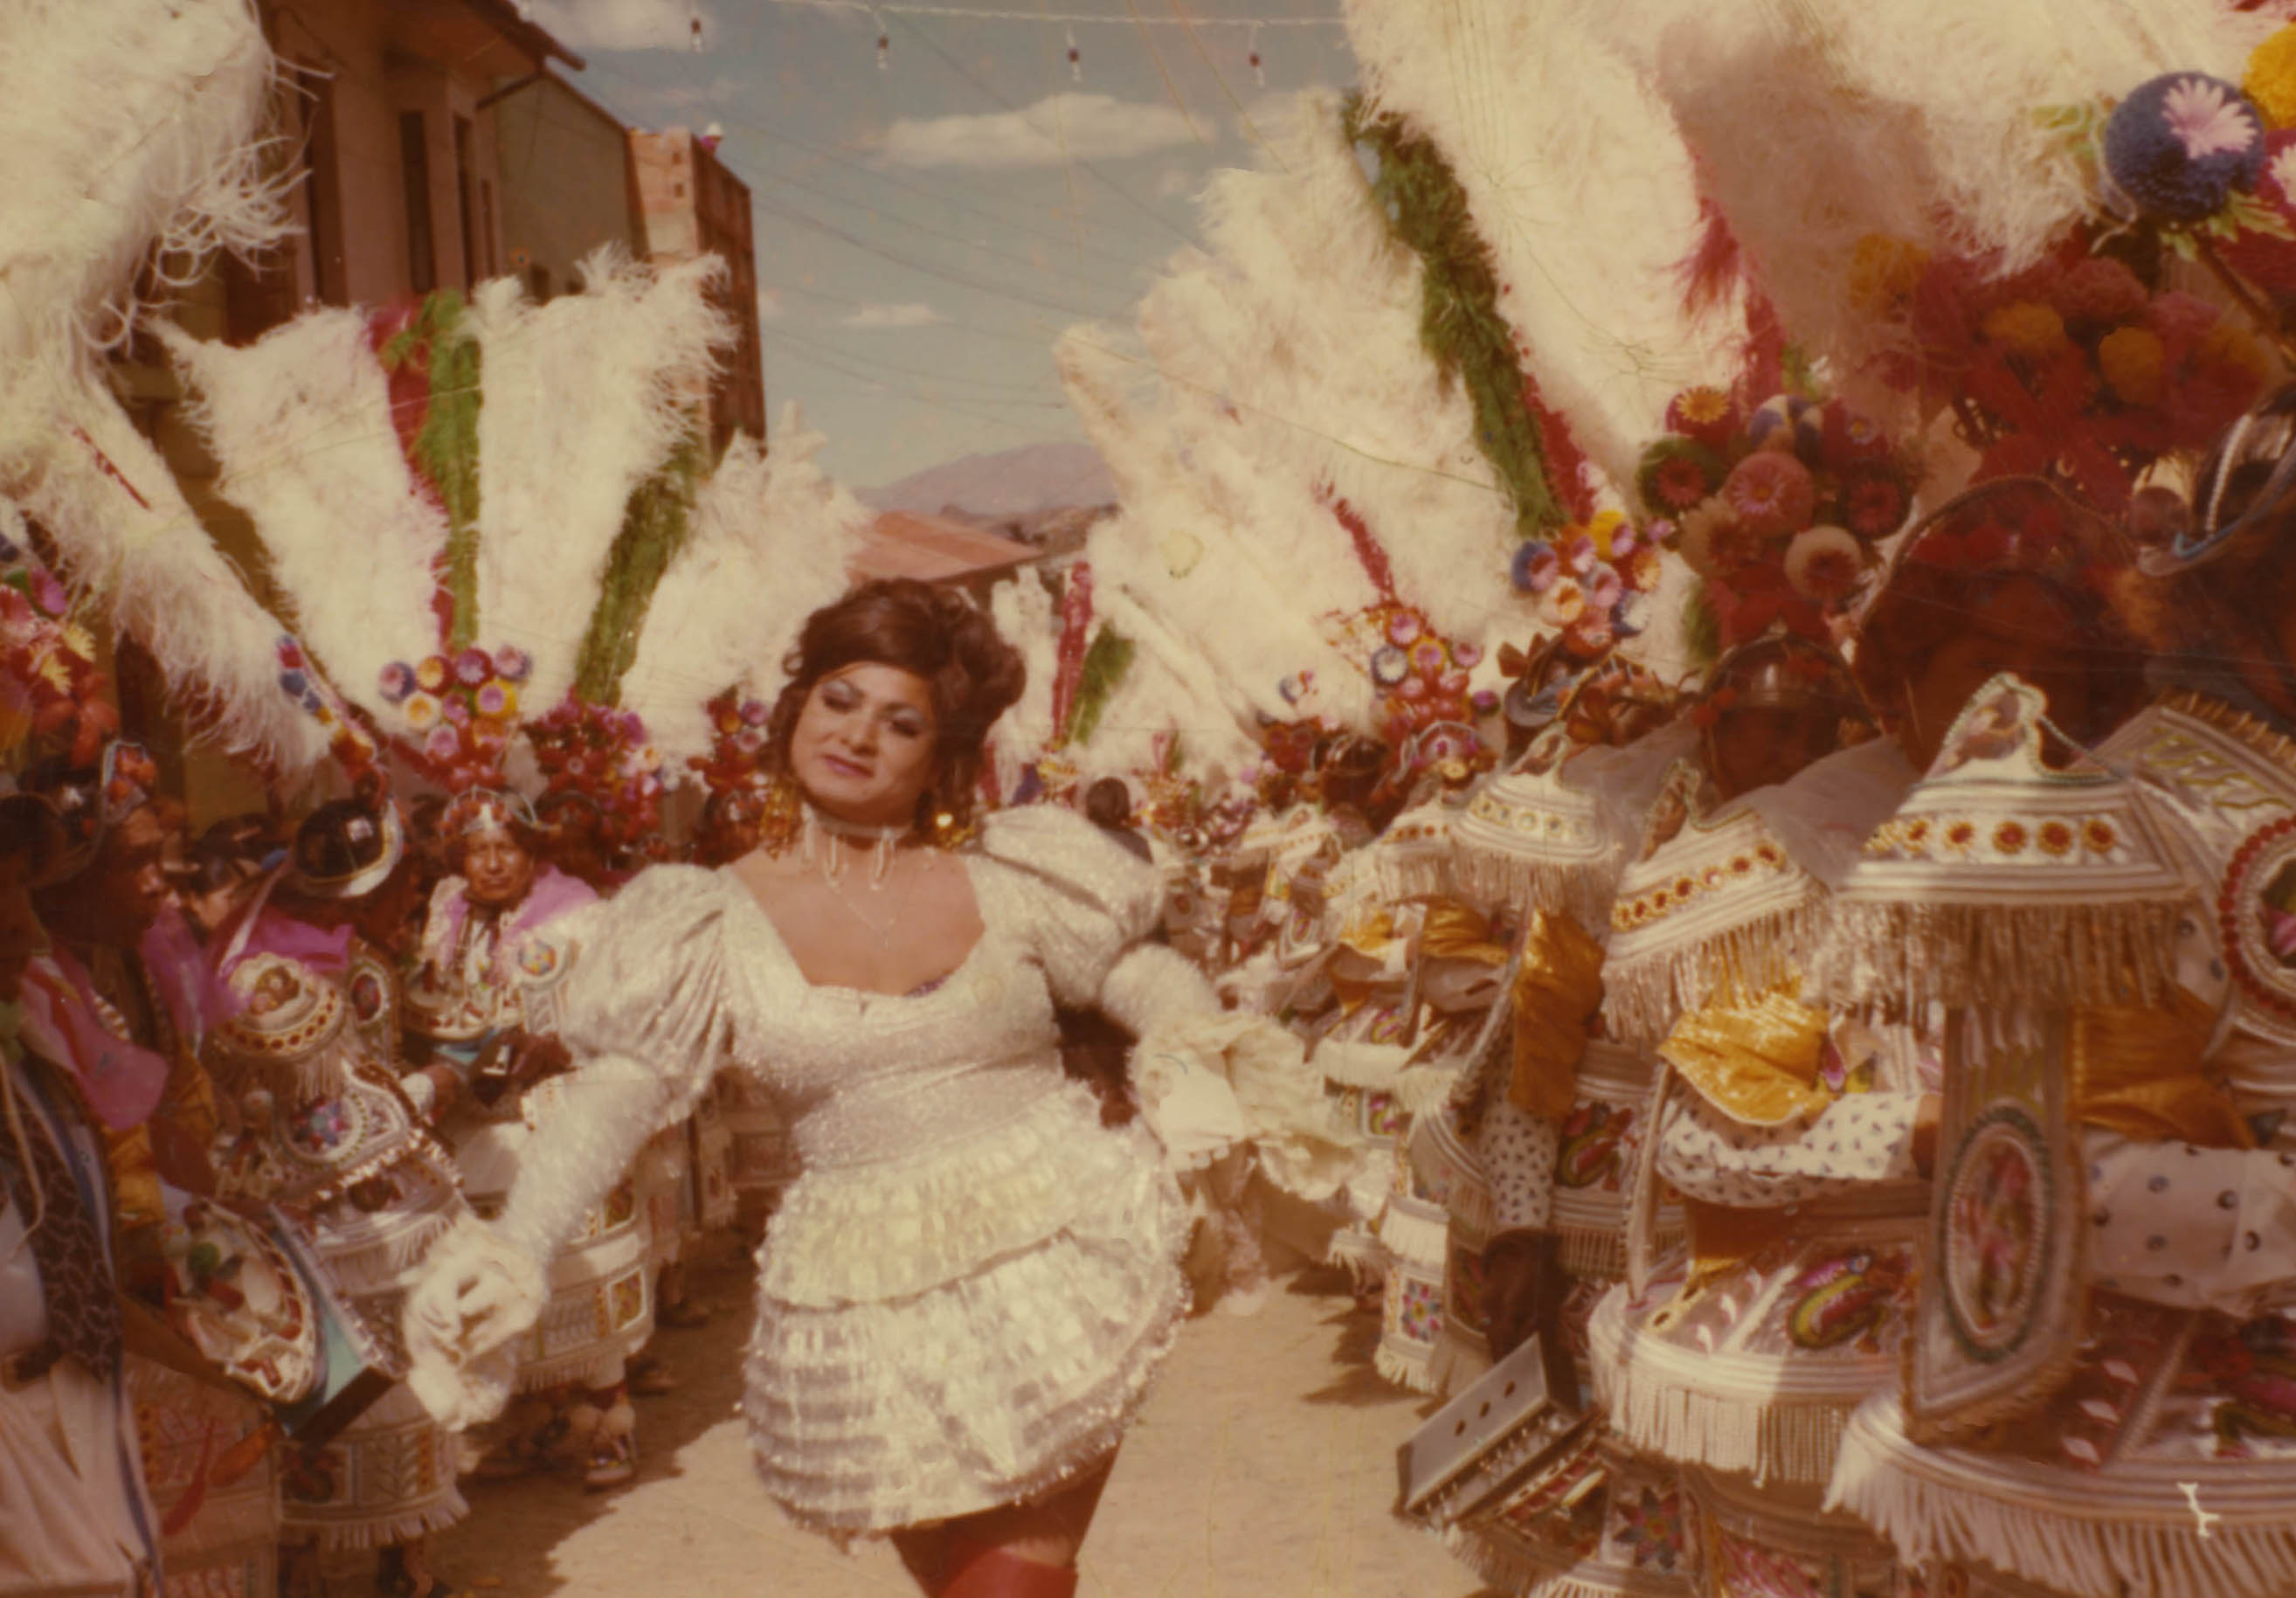 A travesti performer dressed as La China Morena in the streets of La Paz, Bolivia